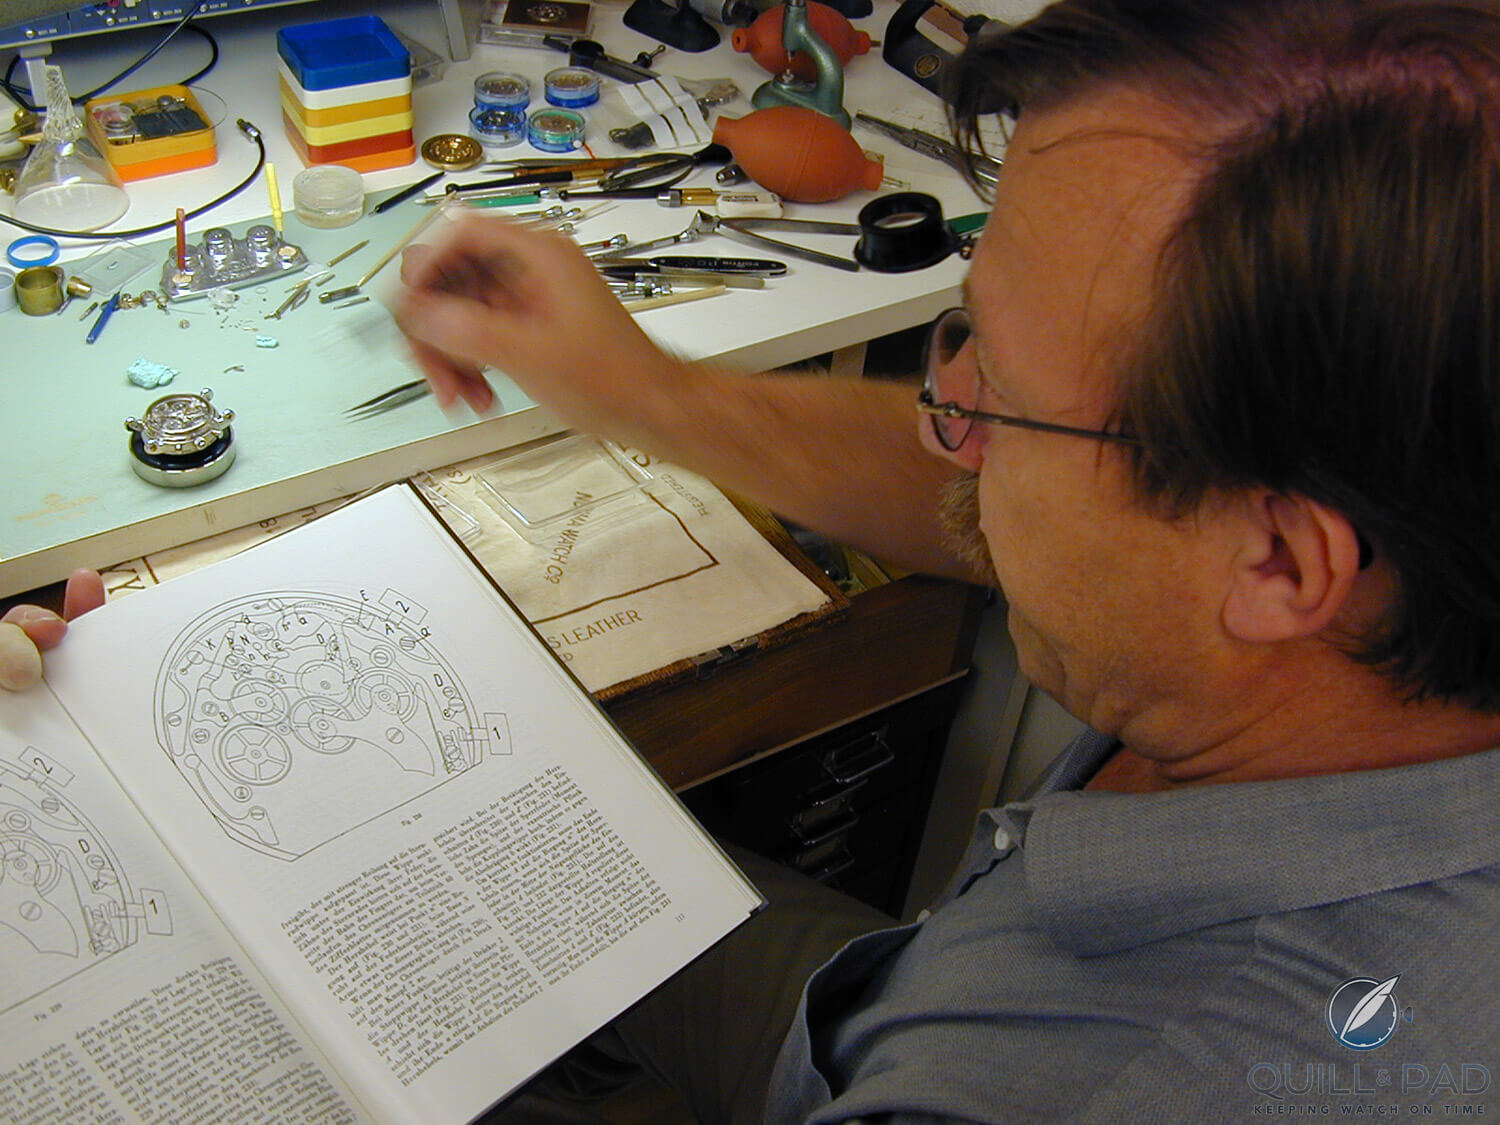 Paul Gerber was the expert watchmaker of choice to realize Lord Arran’s desired enhancements (photo courtesy Dr. Magnus Bosse)